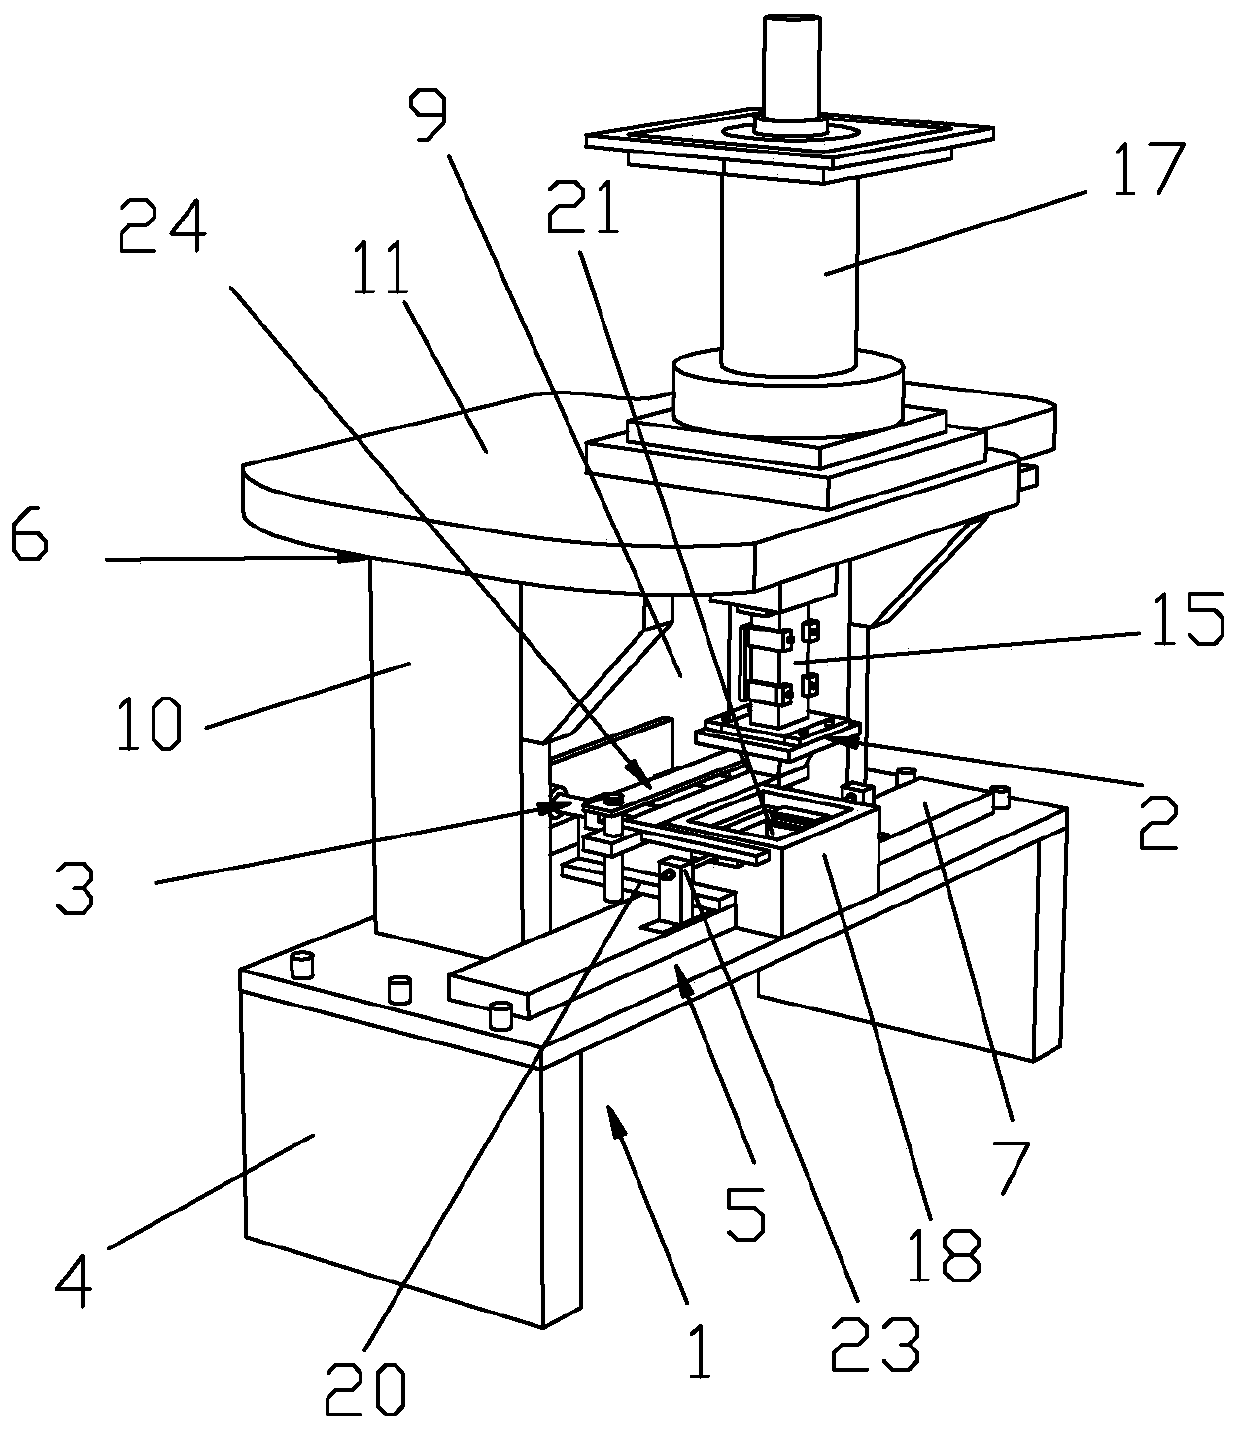 A stamping and crimping device for producing range hood net covers